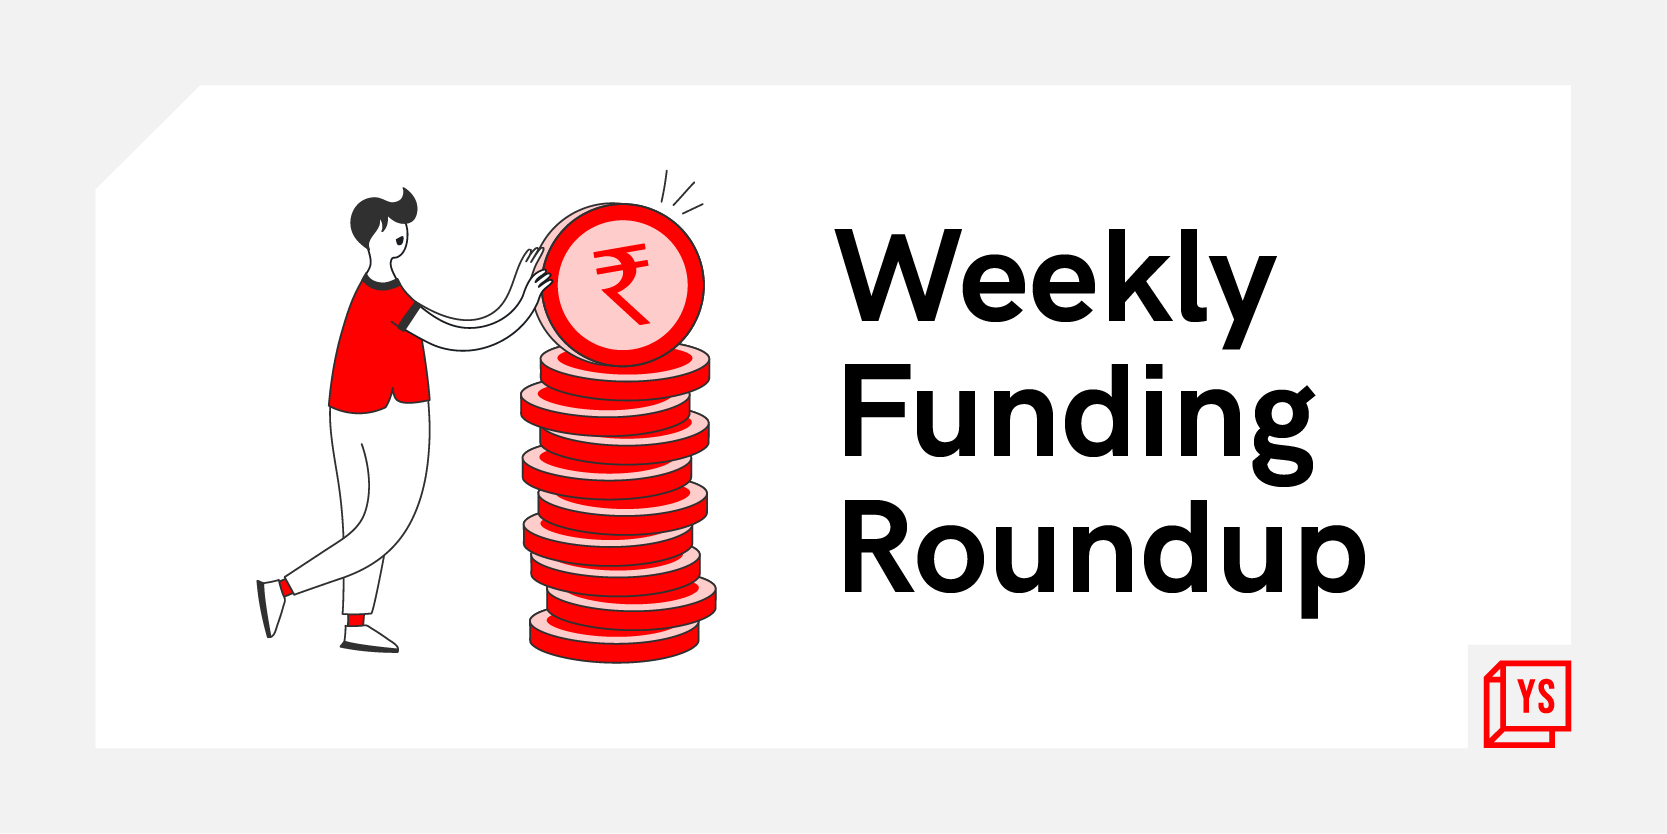 (Weekly funding roundup Sept 26-30) The month of September ends on a subdued note

